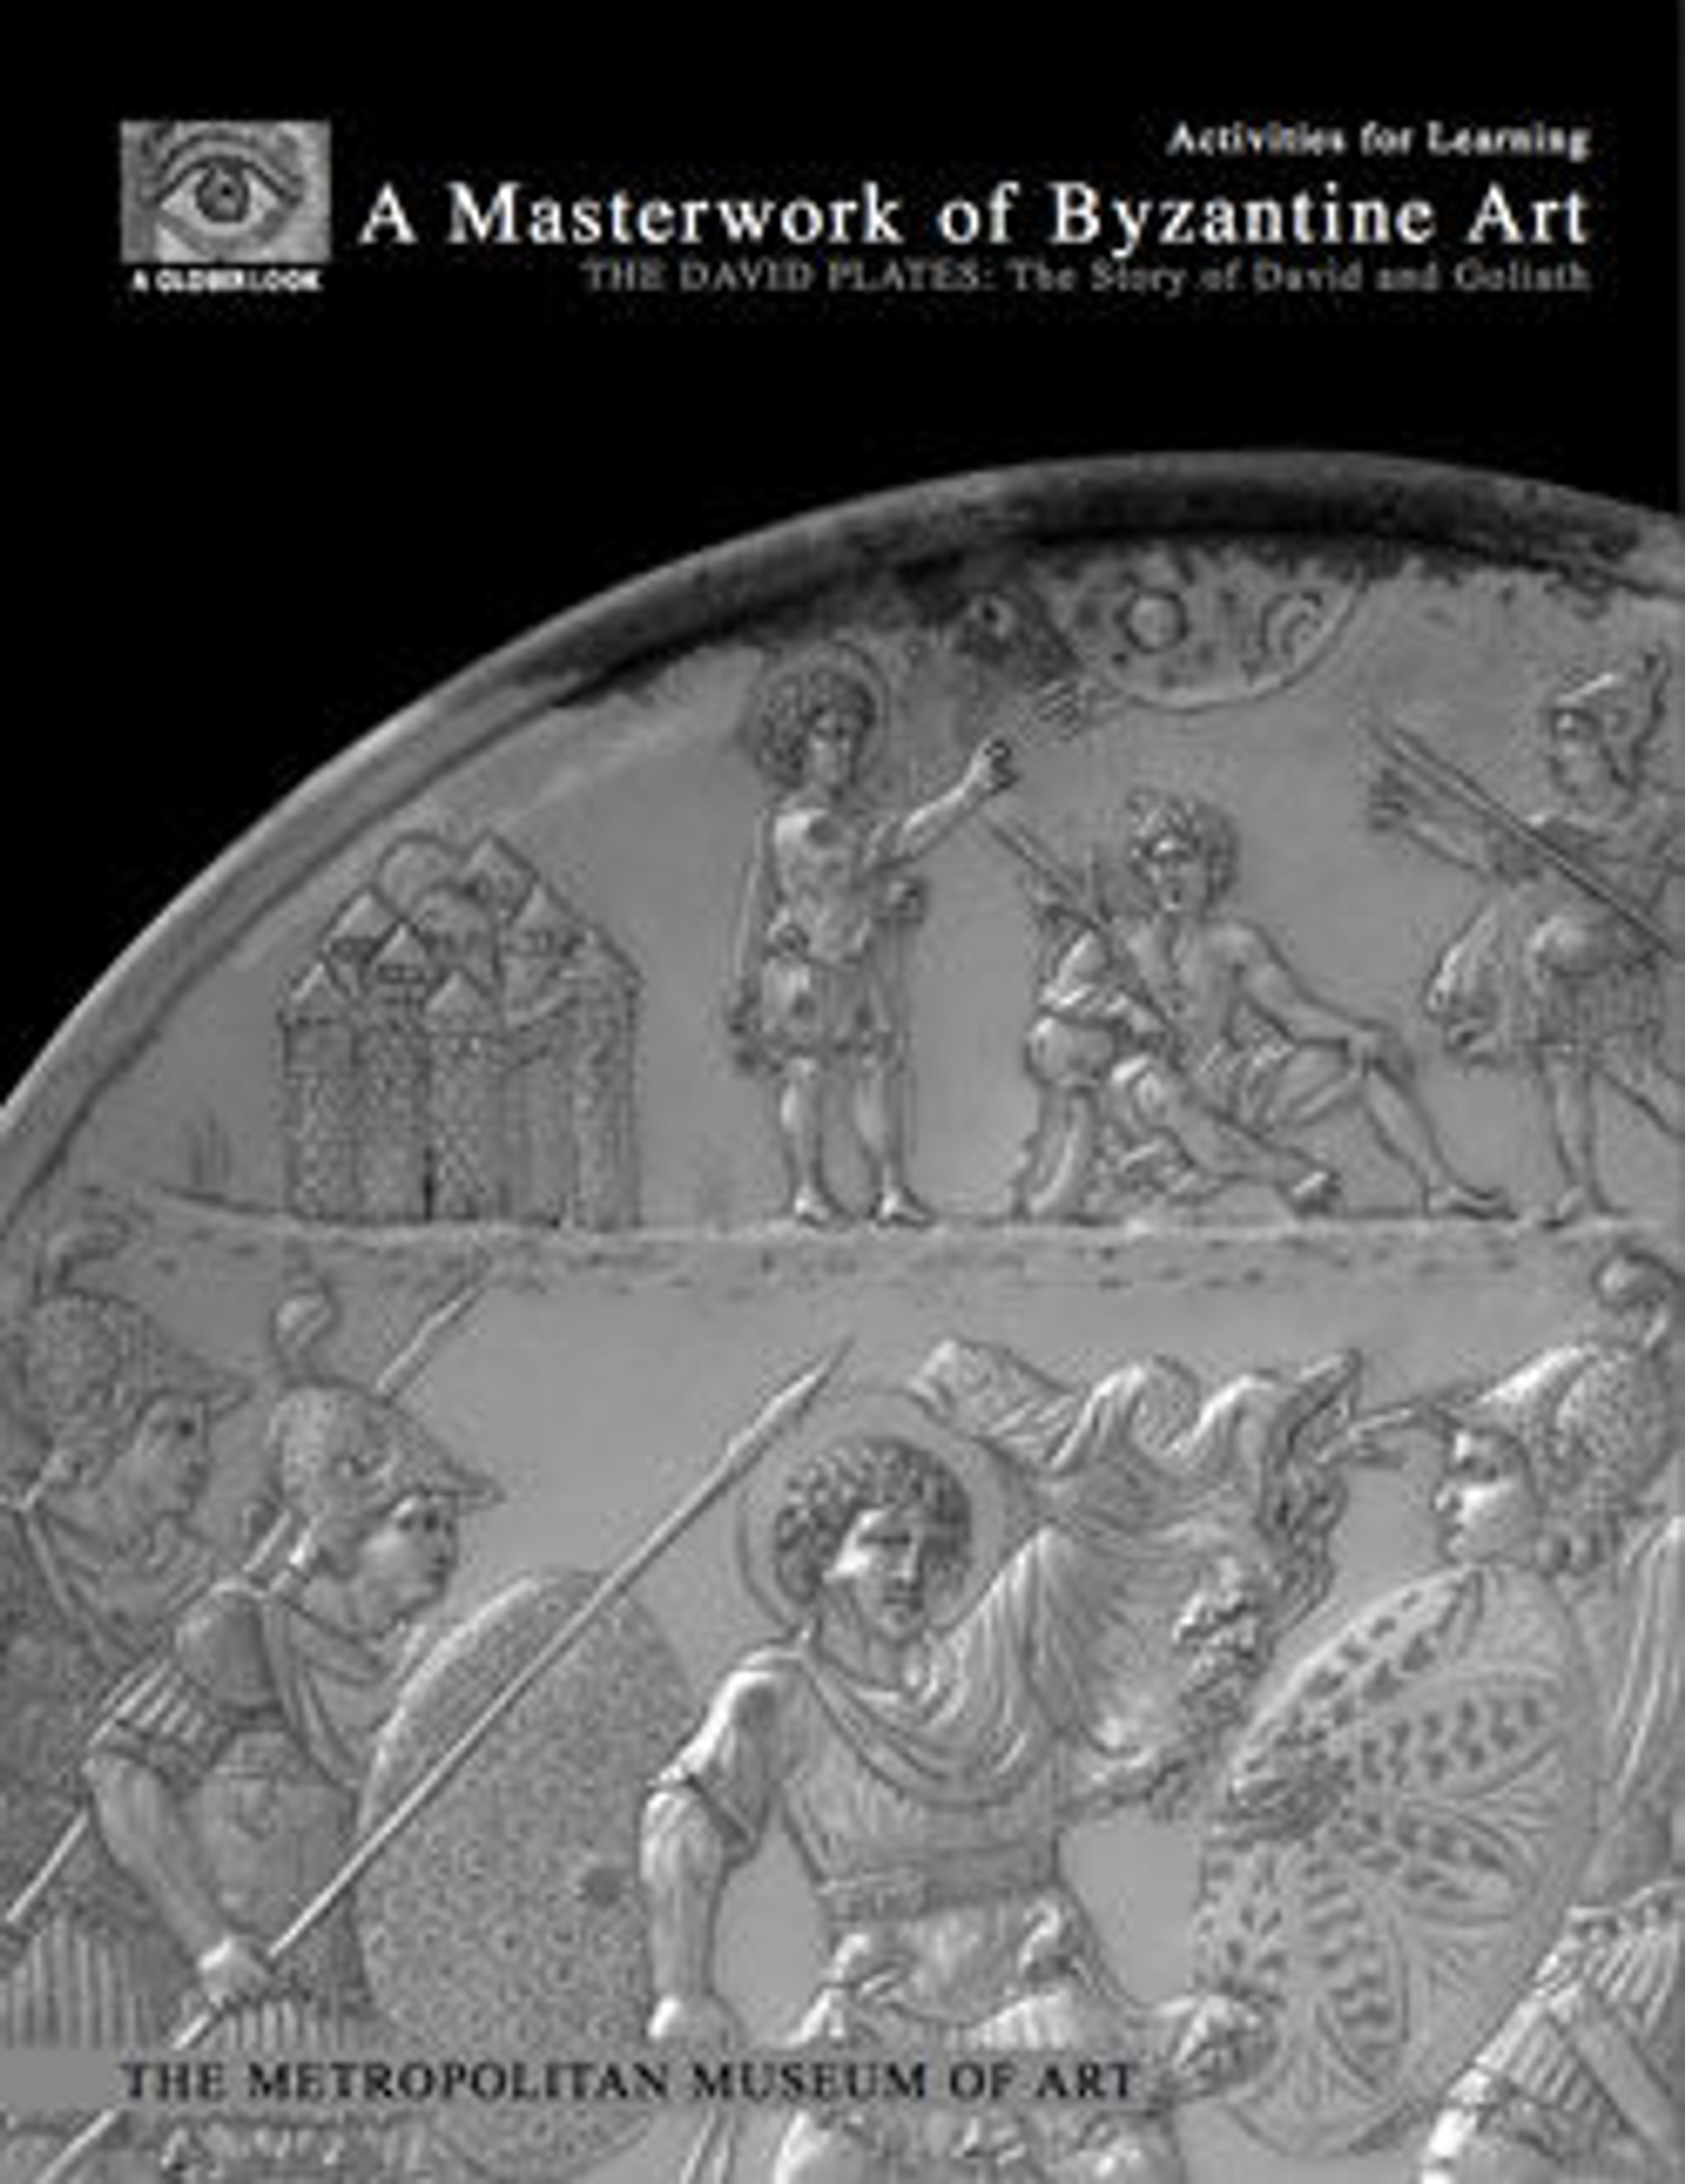 A Masterwork of Byzantine Art-The David Plates: The Story of David and Goliath, Activities for Learning